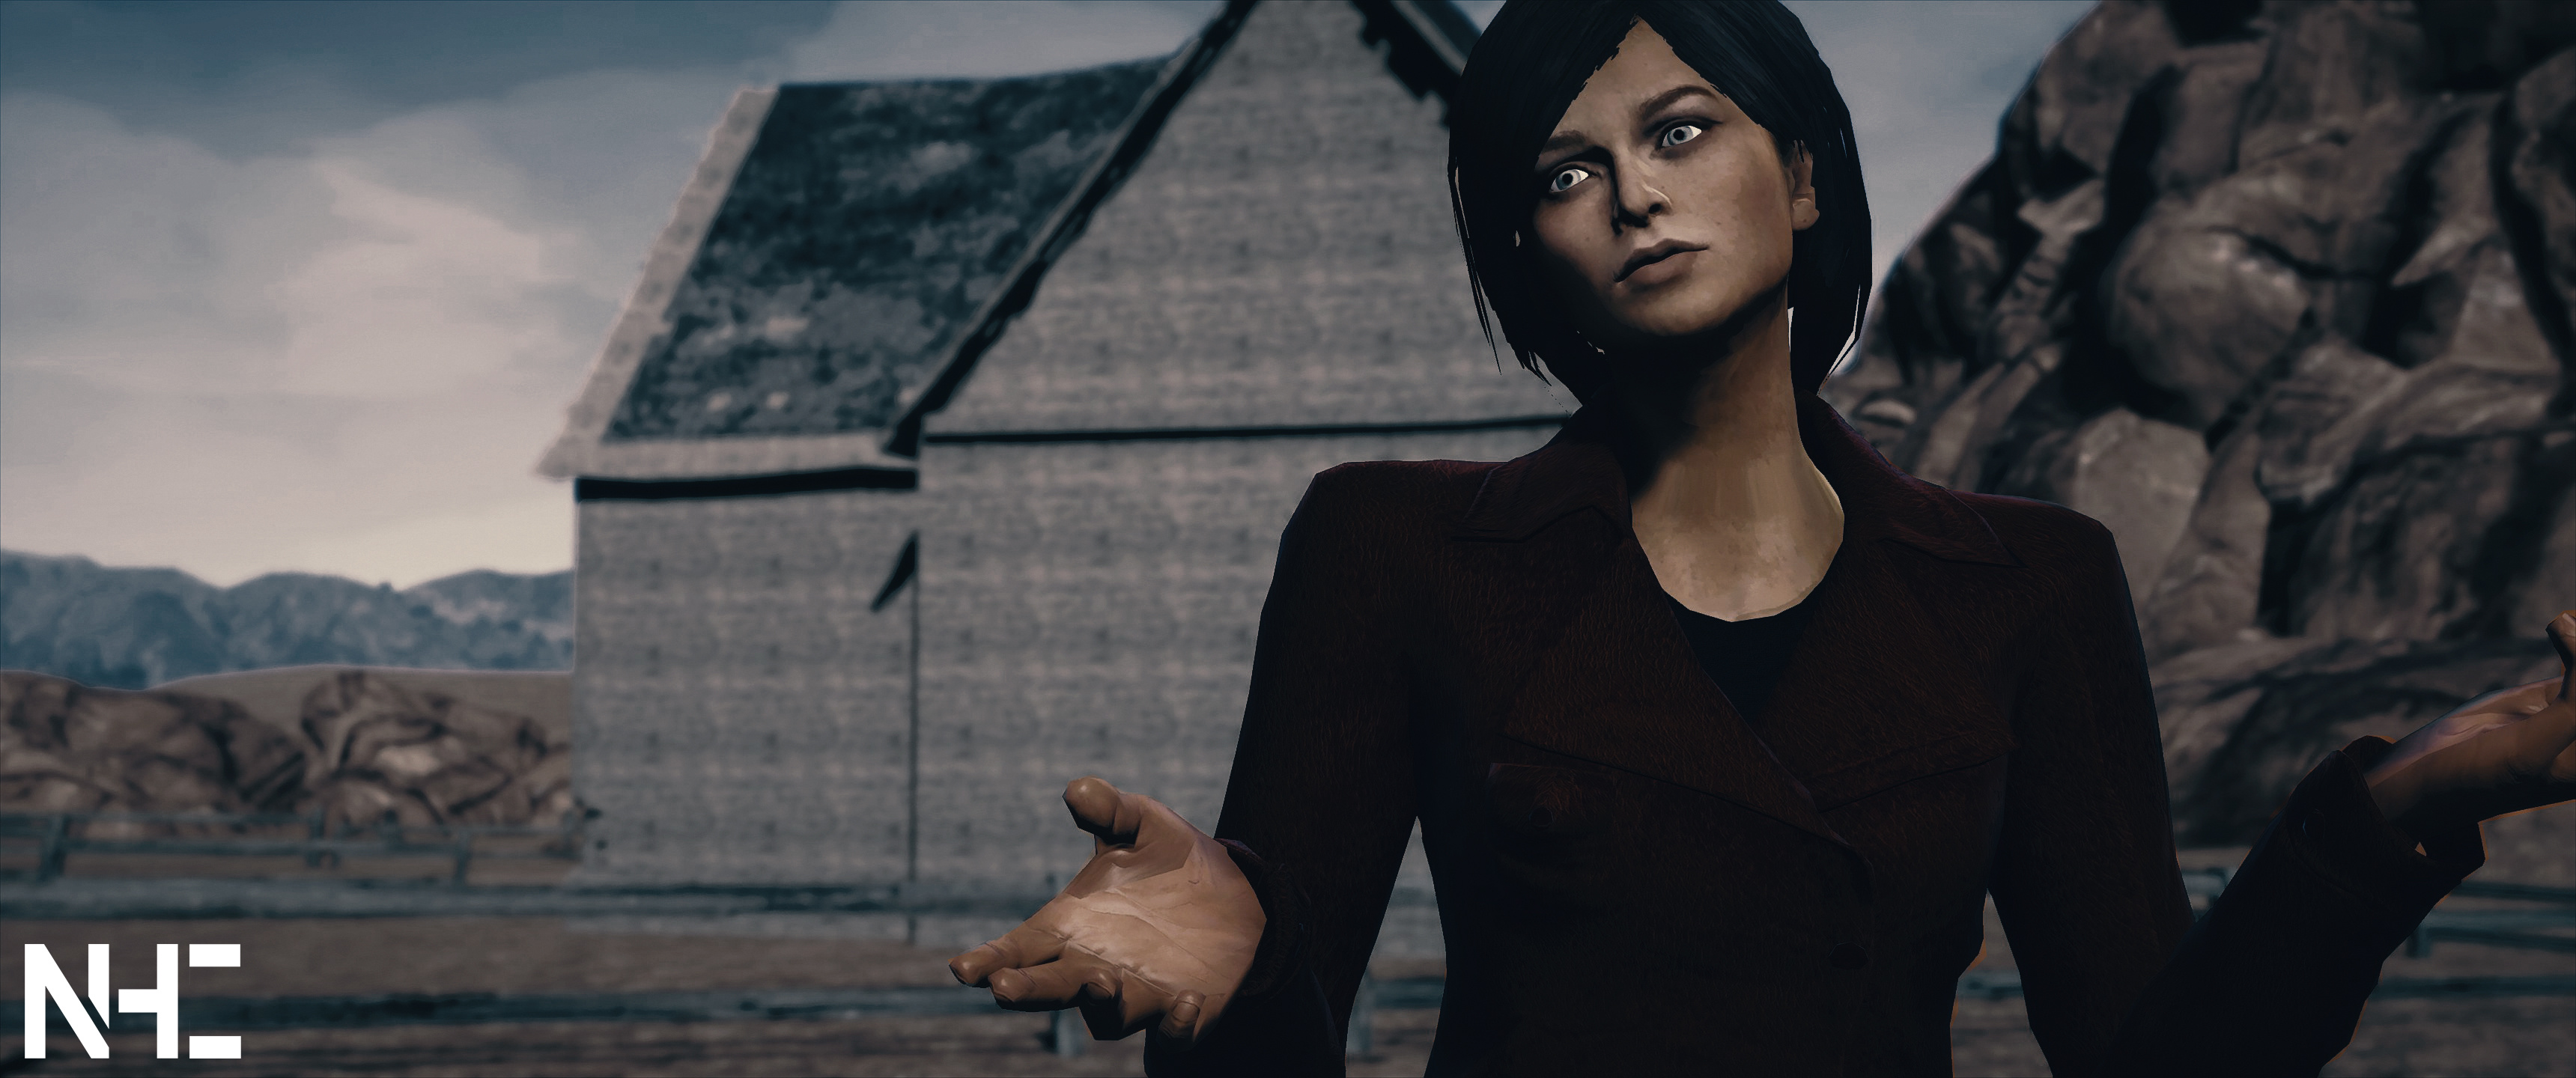 Chloe Frazer From Uncharted 3 - GTA5-Mods.com